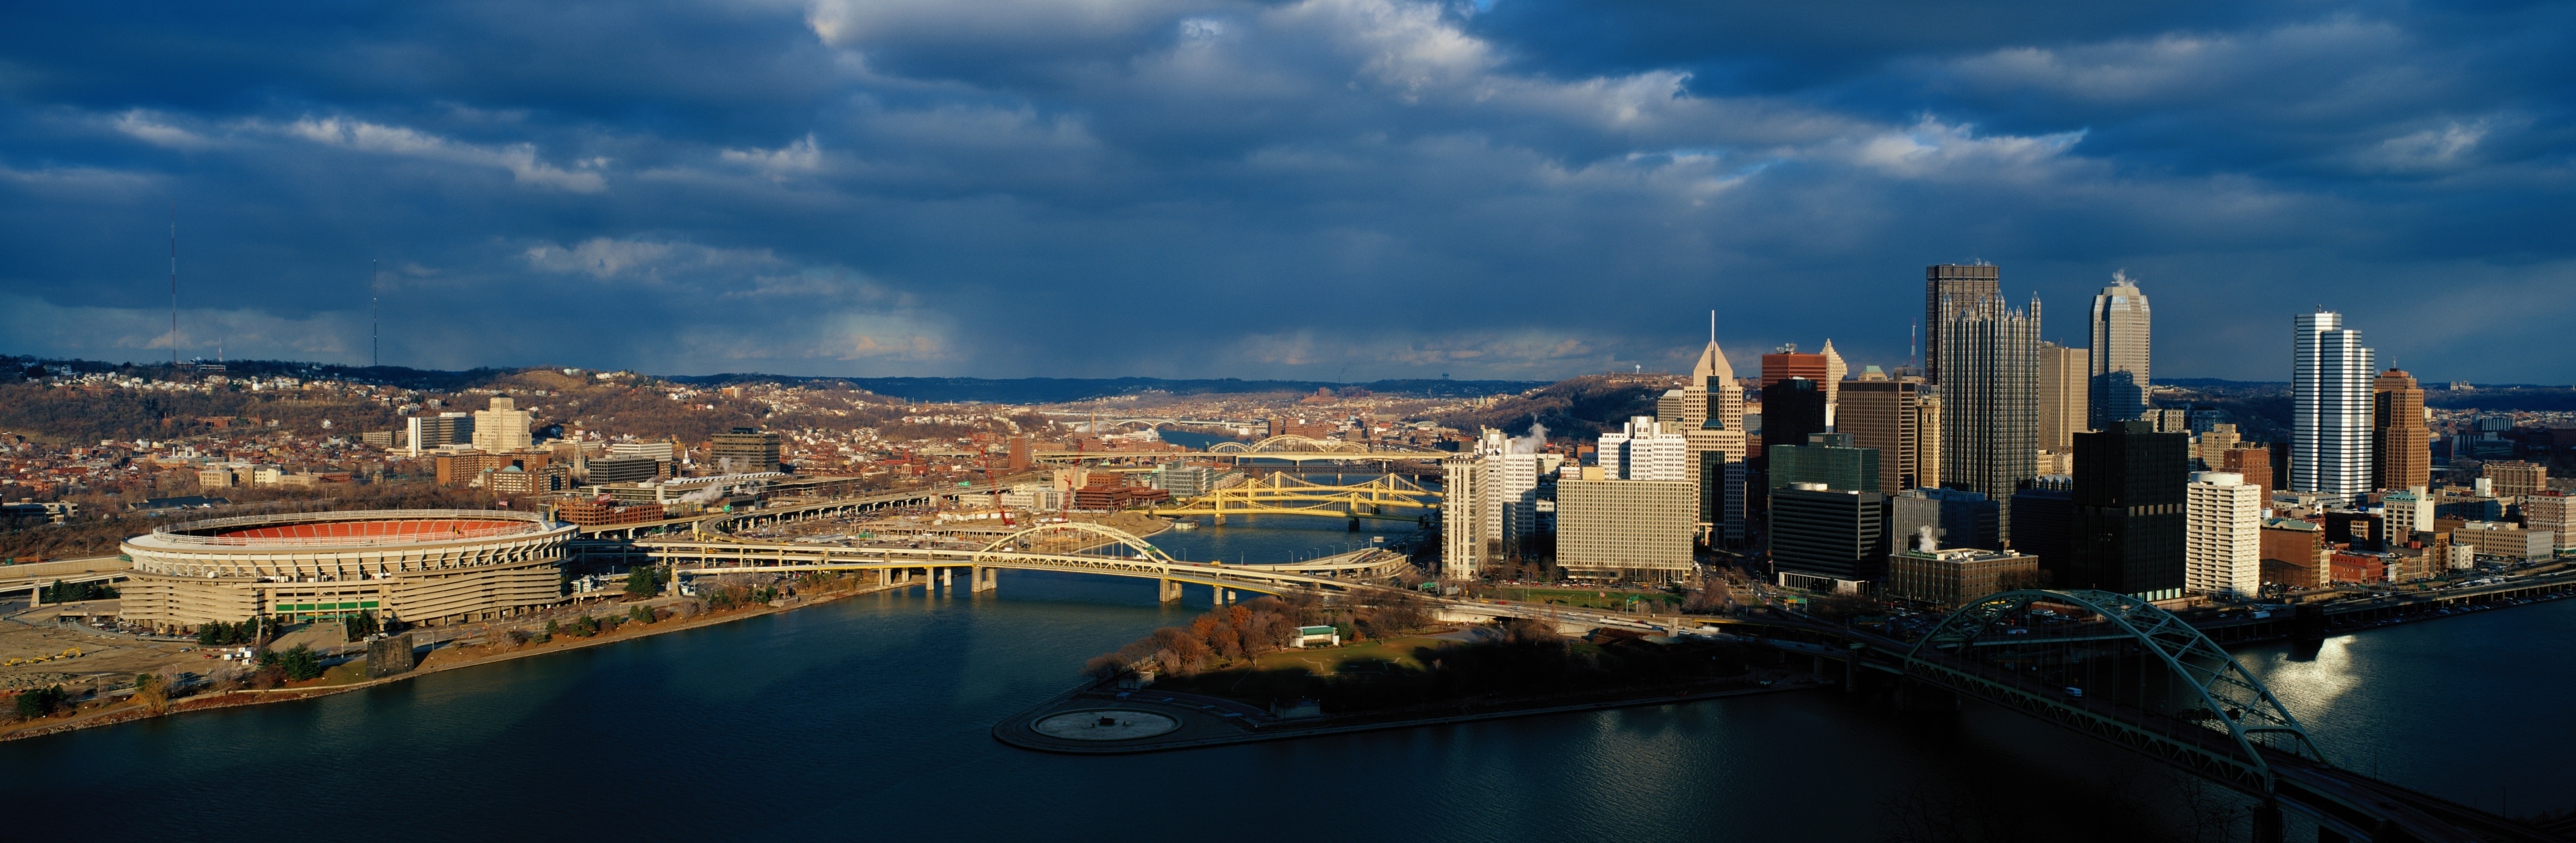 What to know about Pittsburgh, Insider's guide, Travel tips, Go Guides recommendation, 3840x1260 Dual Screen Desktop